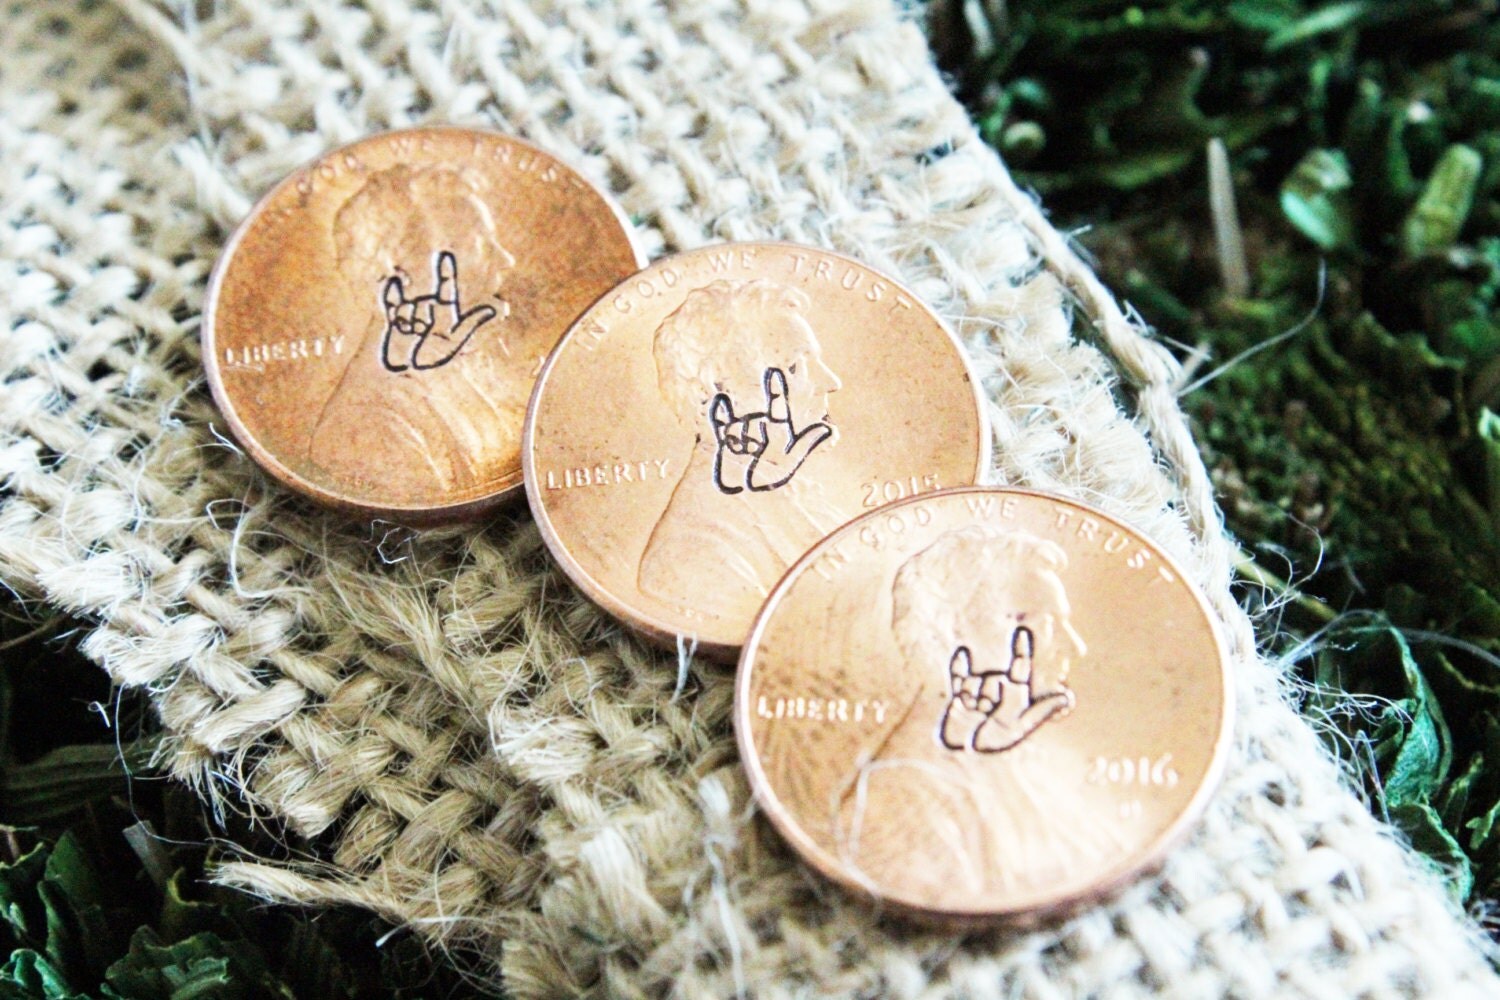 Sign Language I love you, Hand Stamped Pennies, Personalized Penny, Engraved Jewelry, Customized, Engraved Penny, Sign Language Jewelry